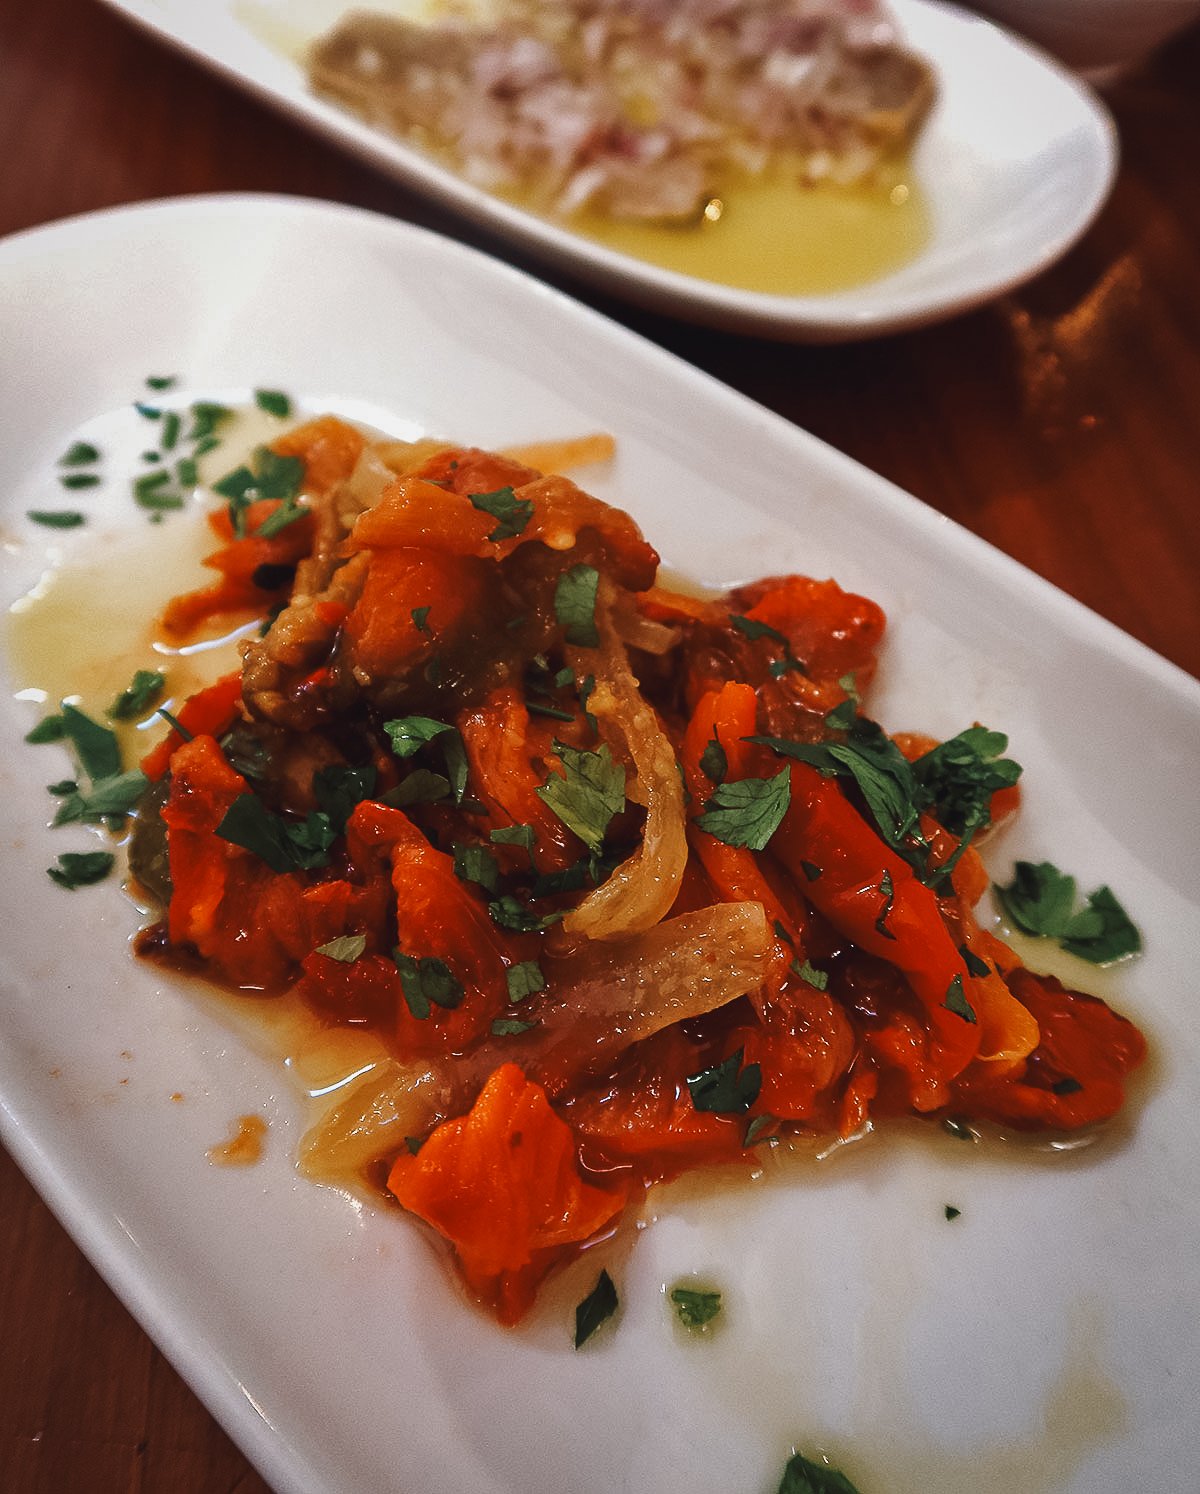 Roasted pepper dish at a restaurant in Malaga